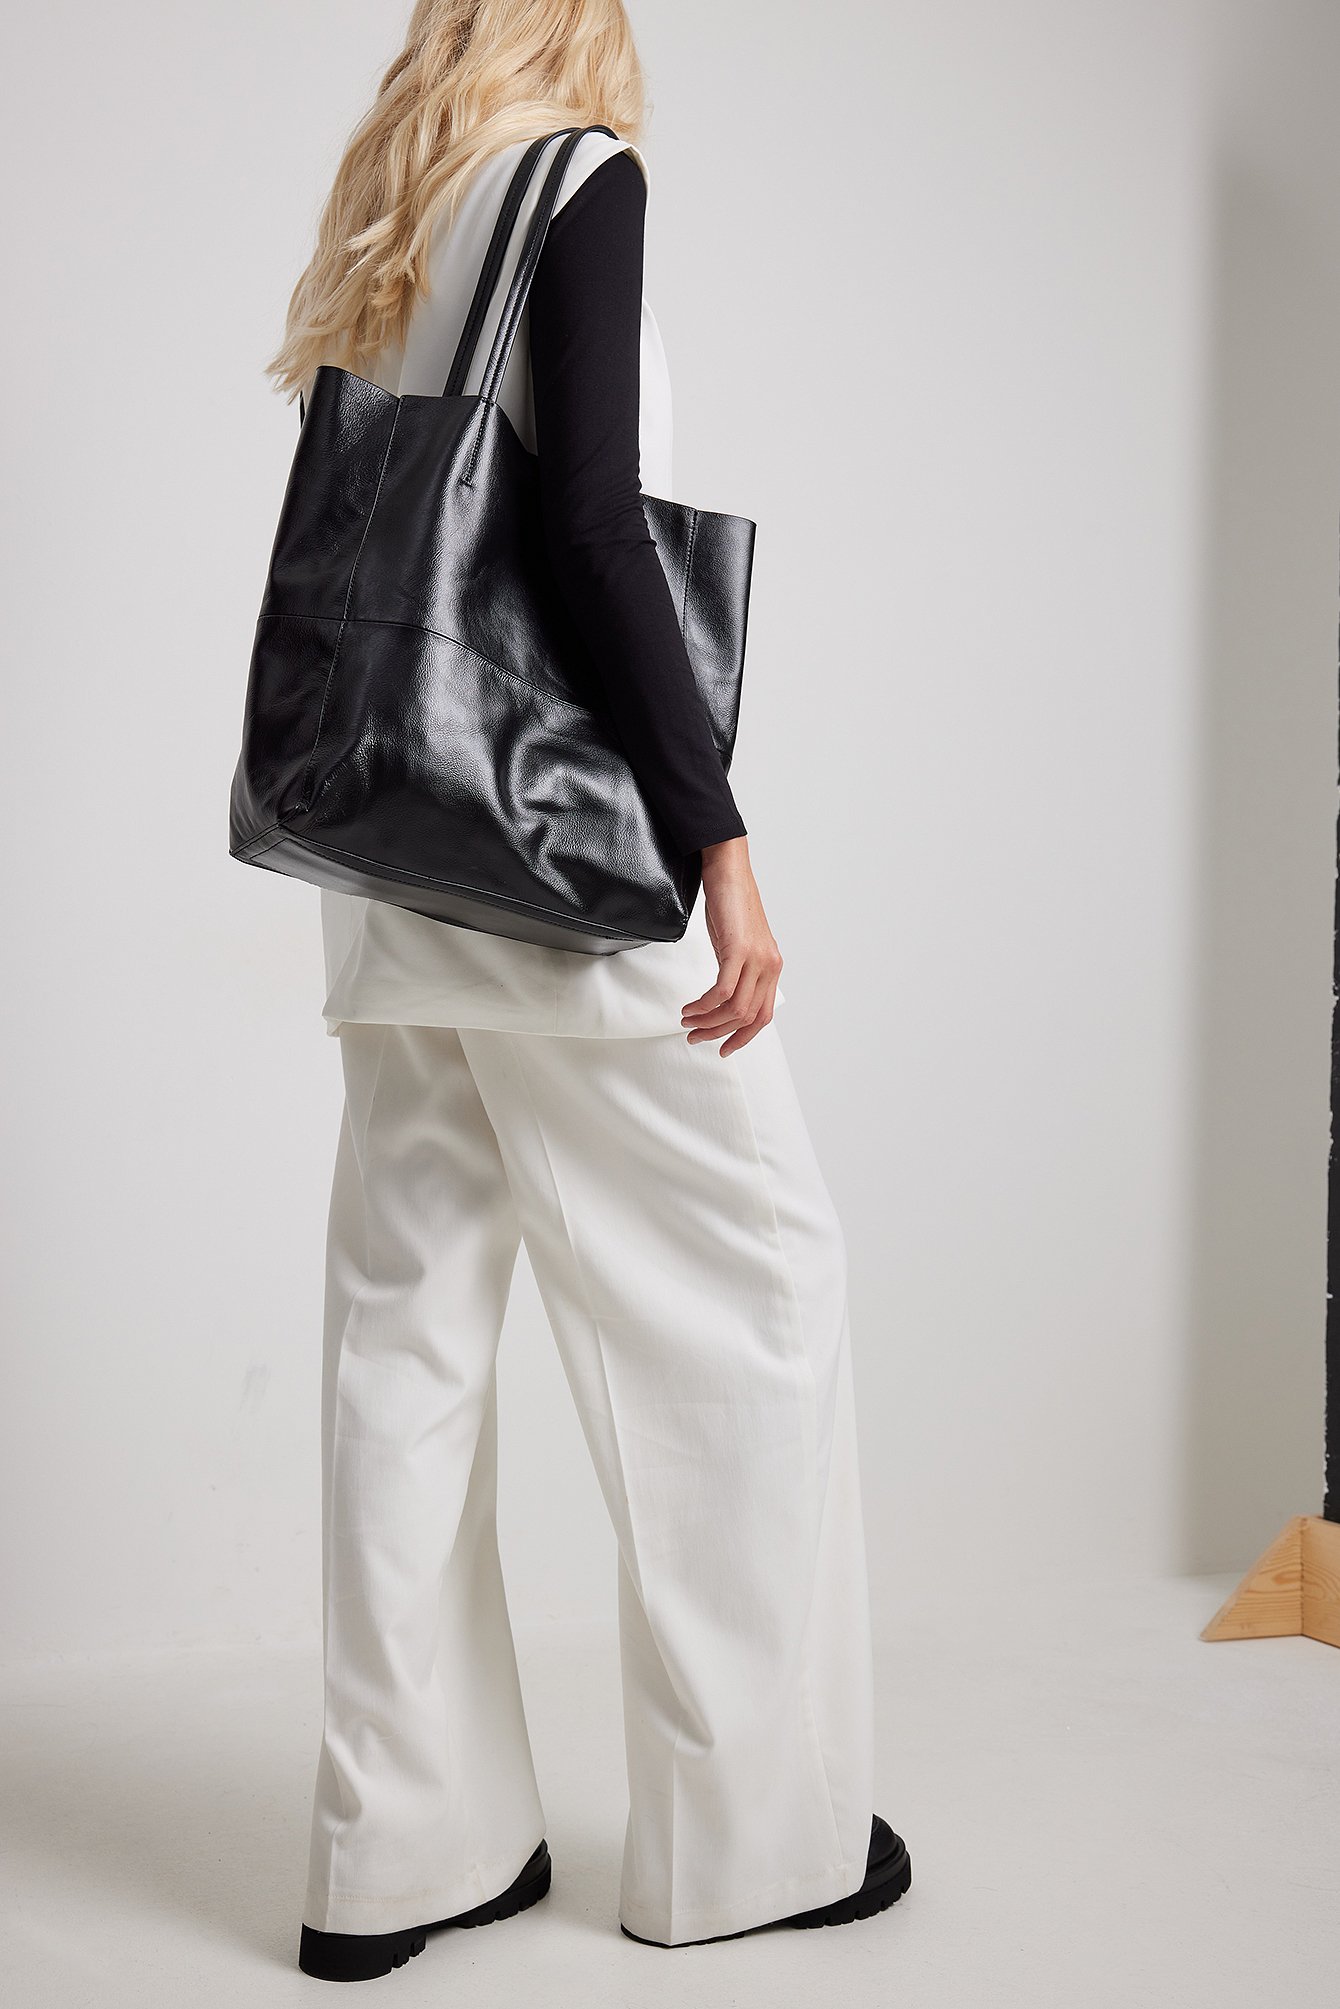 Black Glossy Patent Leather Tote